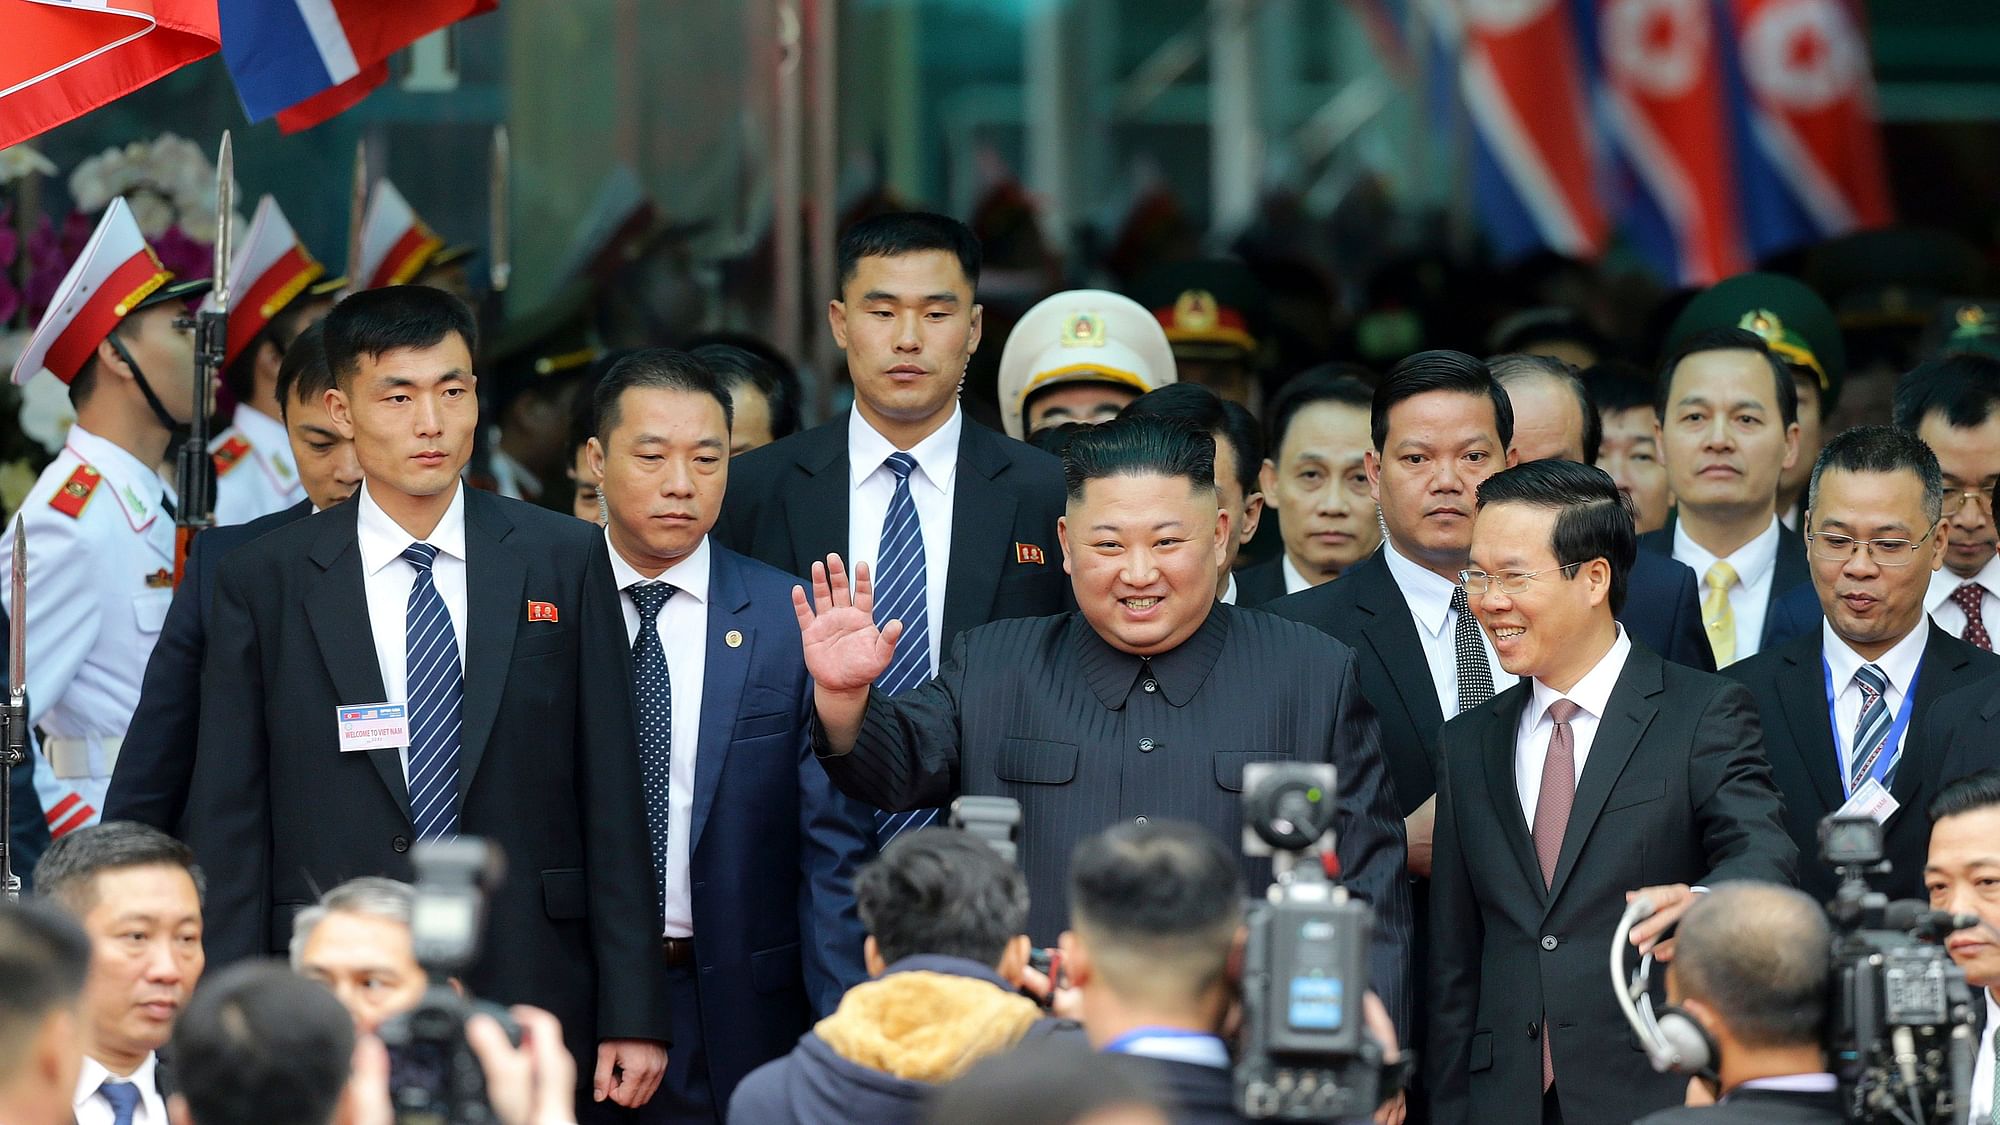 Kim Jong Un, fresh off his trip to Hanoi, Vietnam for his second summit with President Donald Trump, is the most prominent candidate of all.&nbsp;